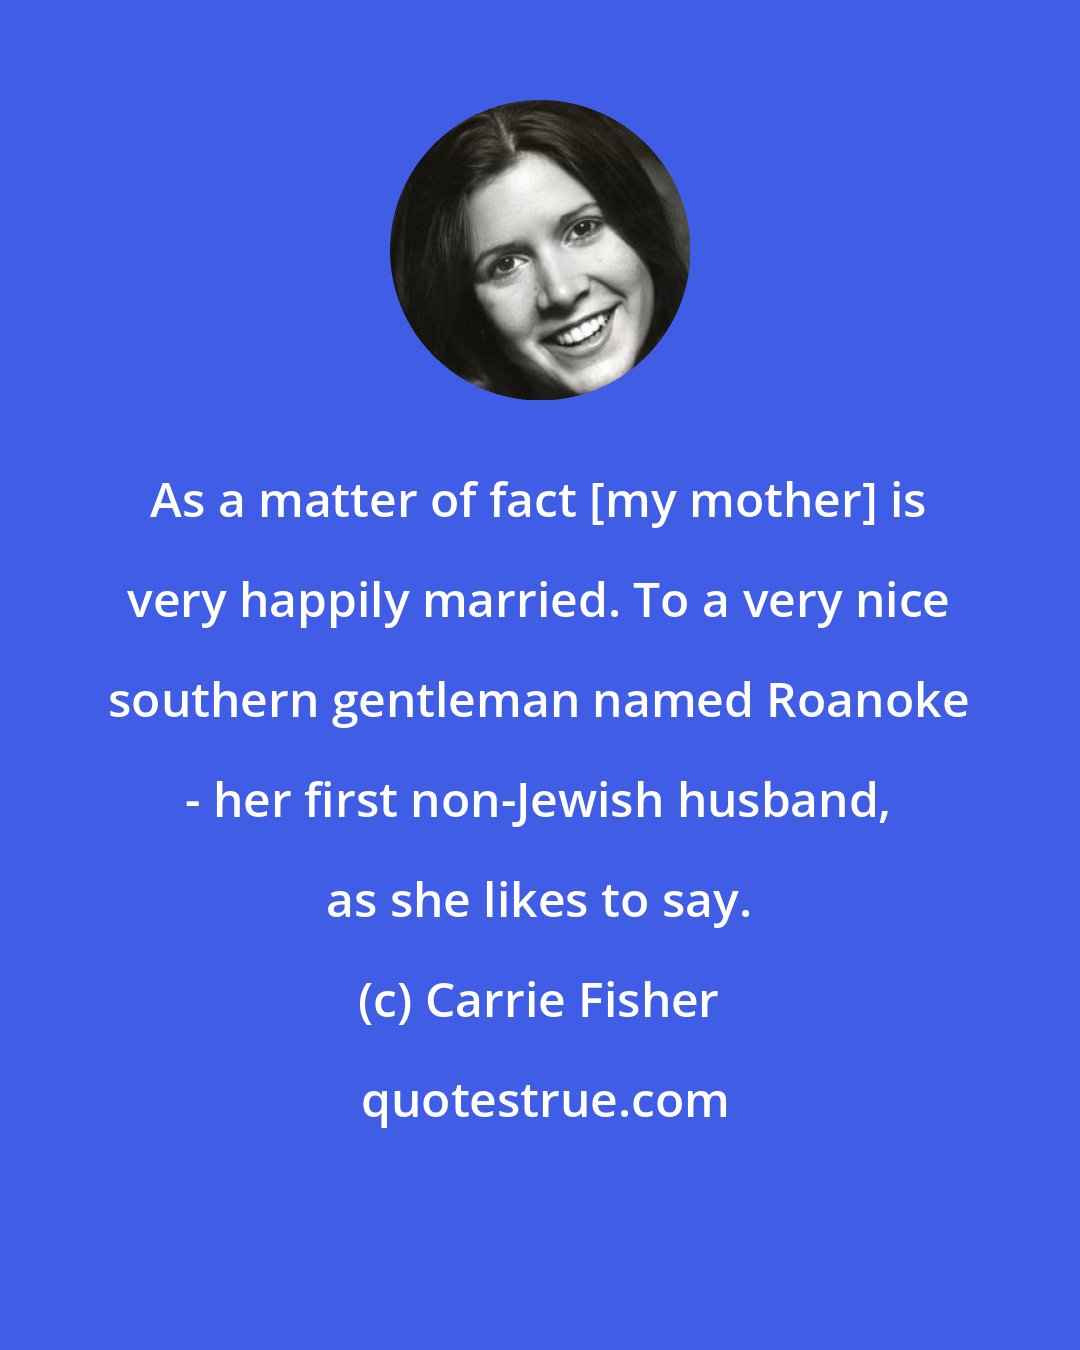 Carrie Fisher: As a matter of fact [my mother] is very happily married. To a very nice southern gentleman named Roanoke - her first non-Jewish husband, as she likes to say.